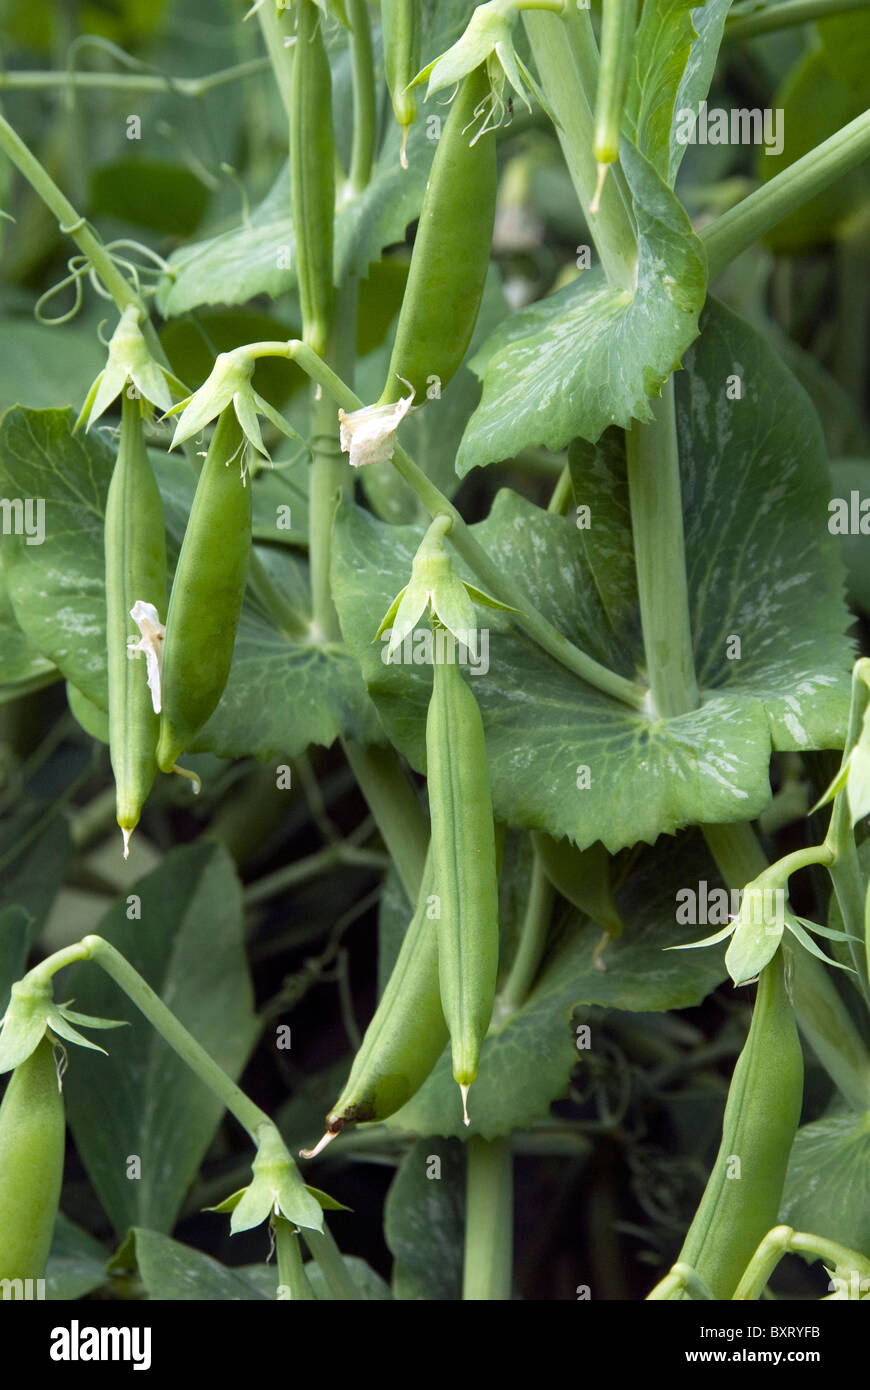 Sugar snap pea pods on plant Stock Photo